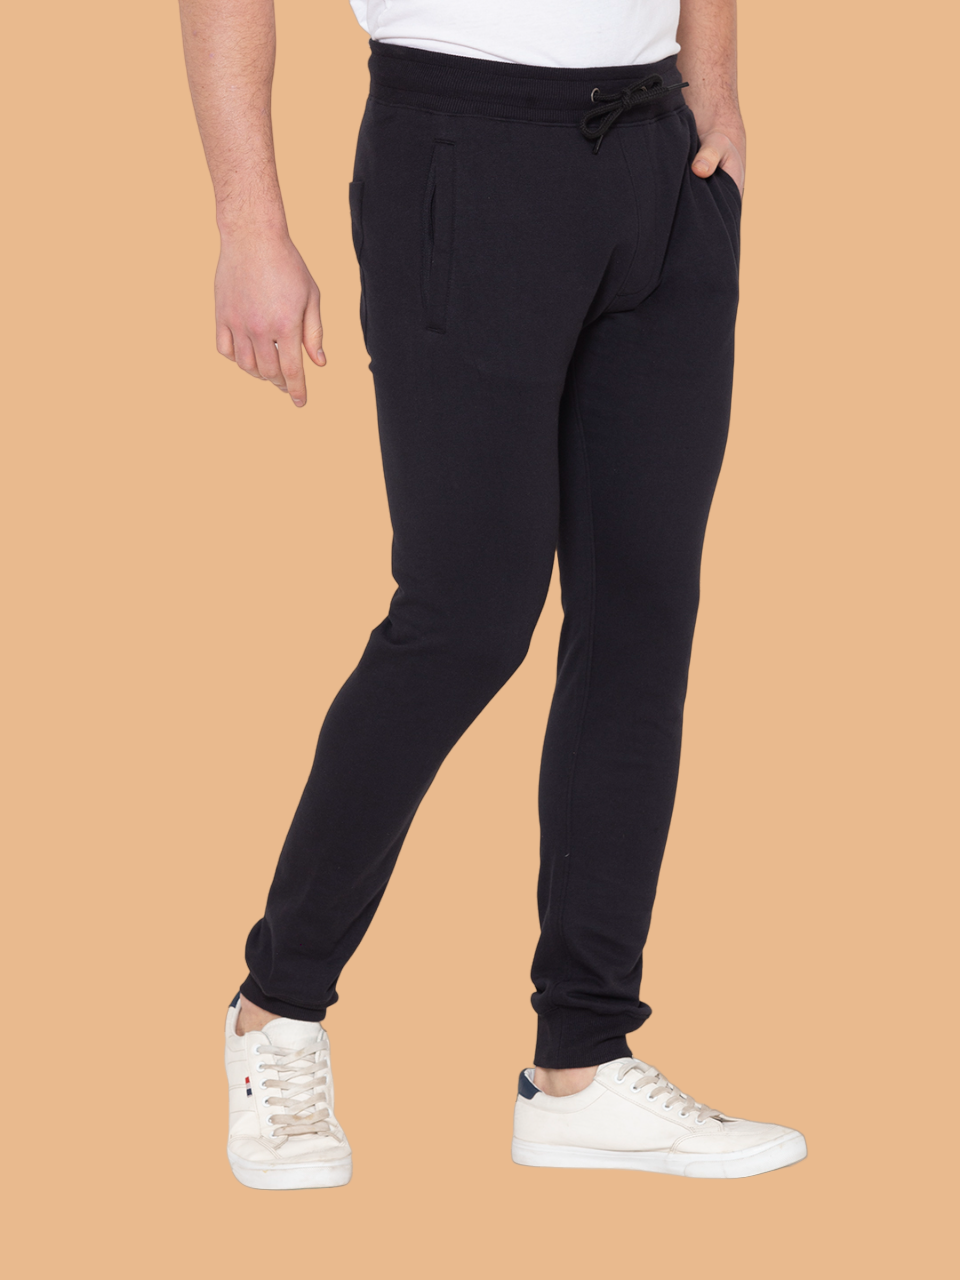 Flawless Men's Black solid Jogger Being Flawless